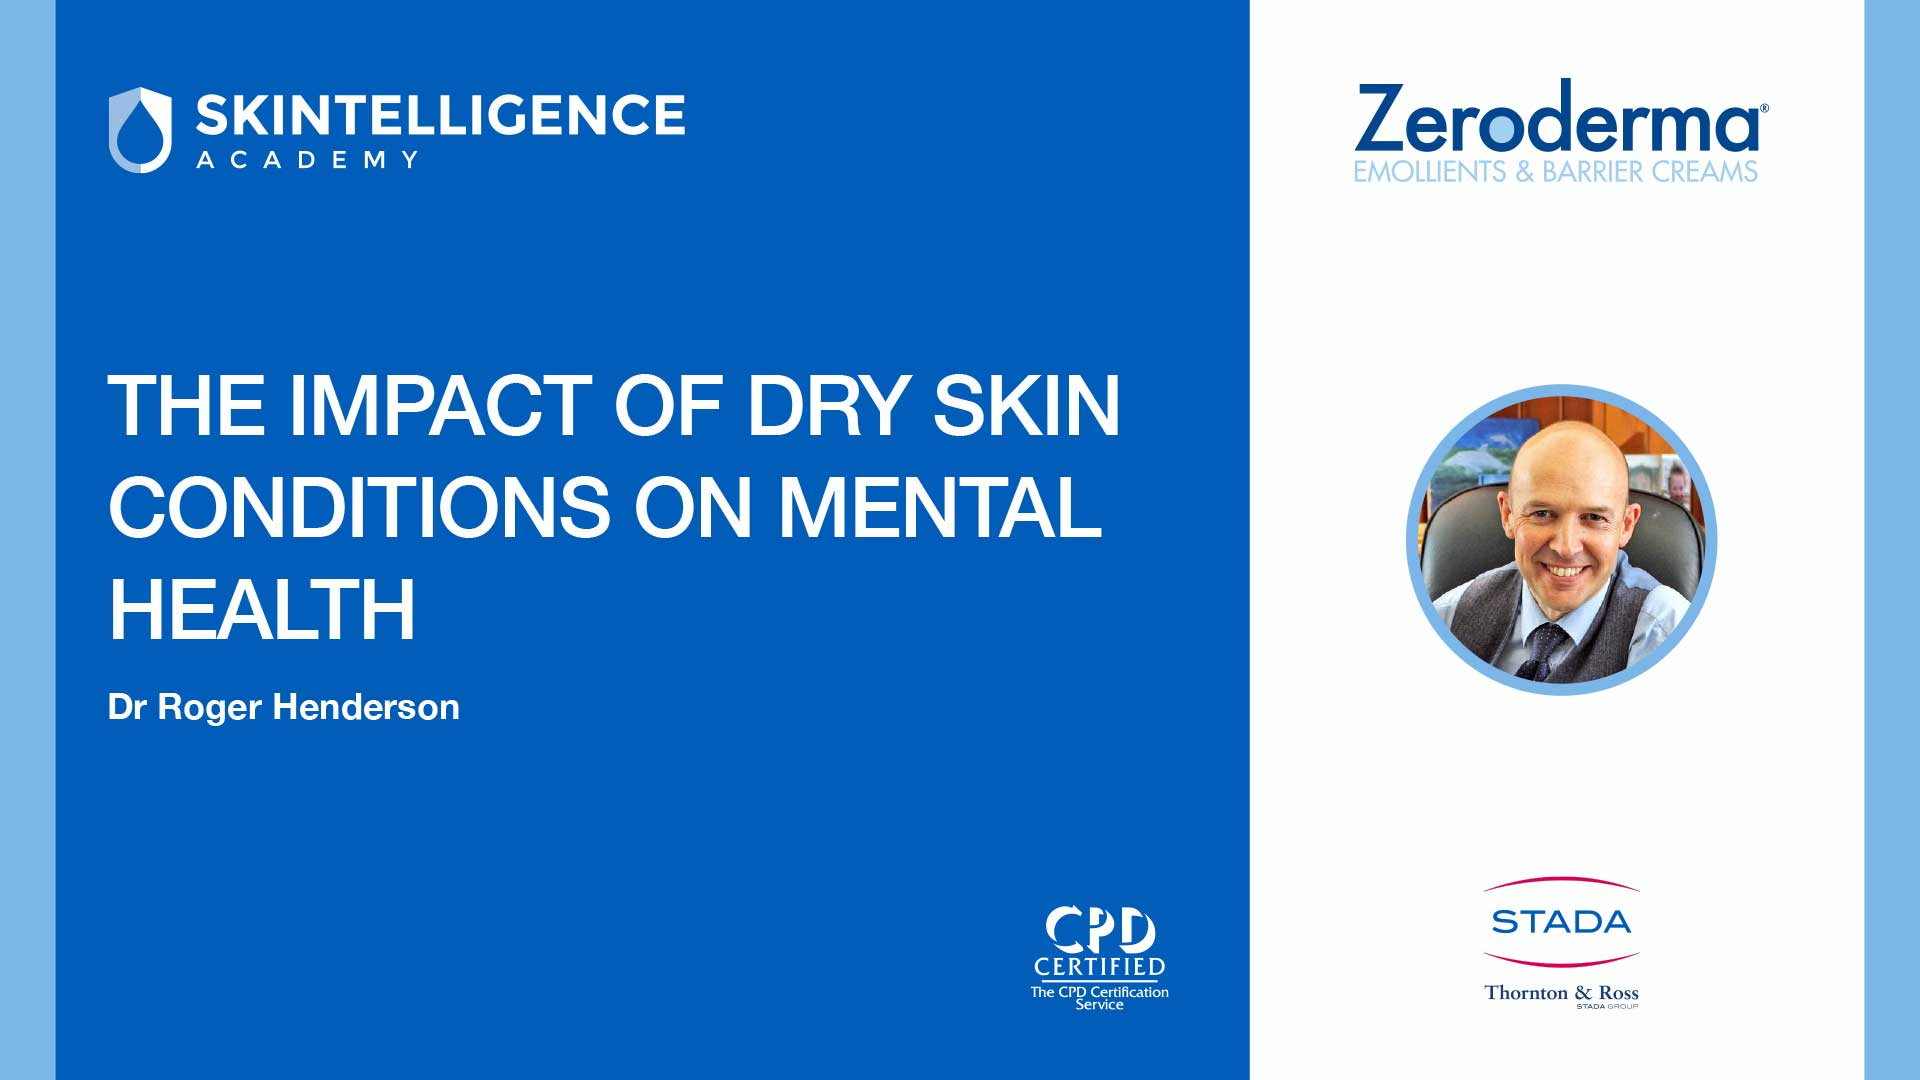 The Impact of Dry Skin Conditions on Mental Health